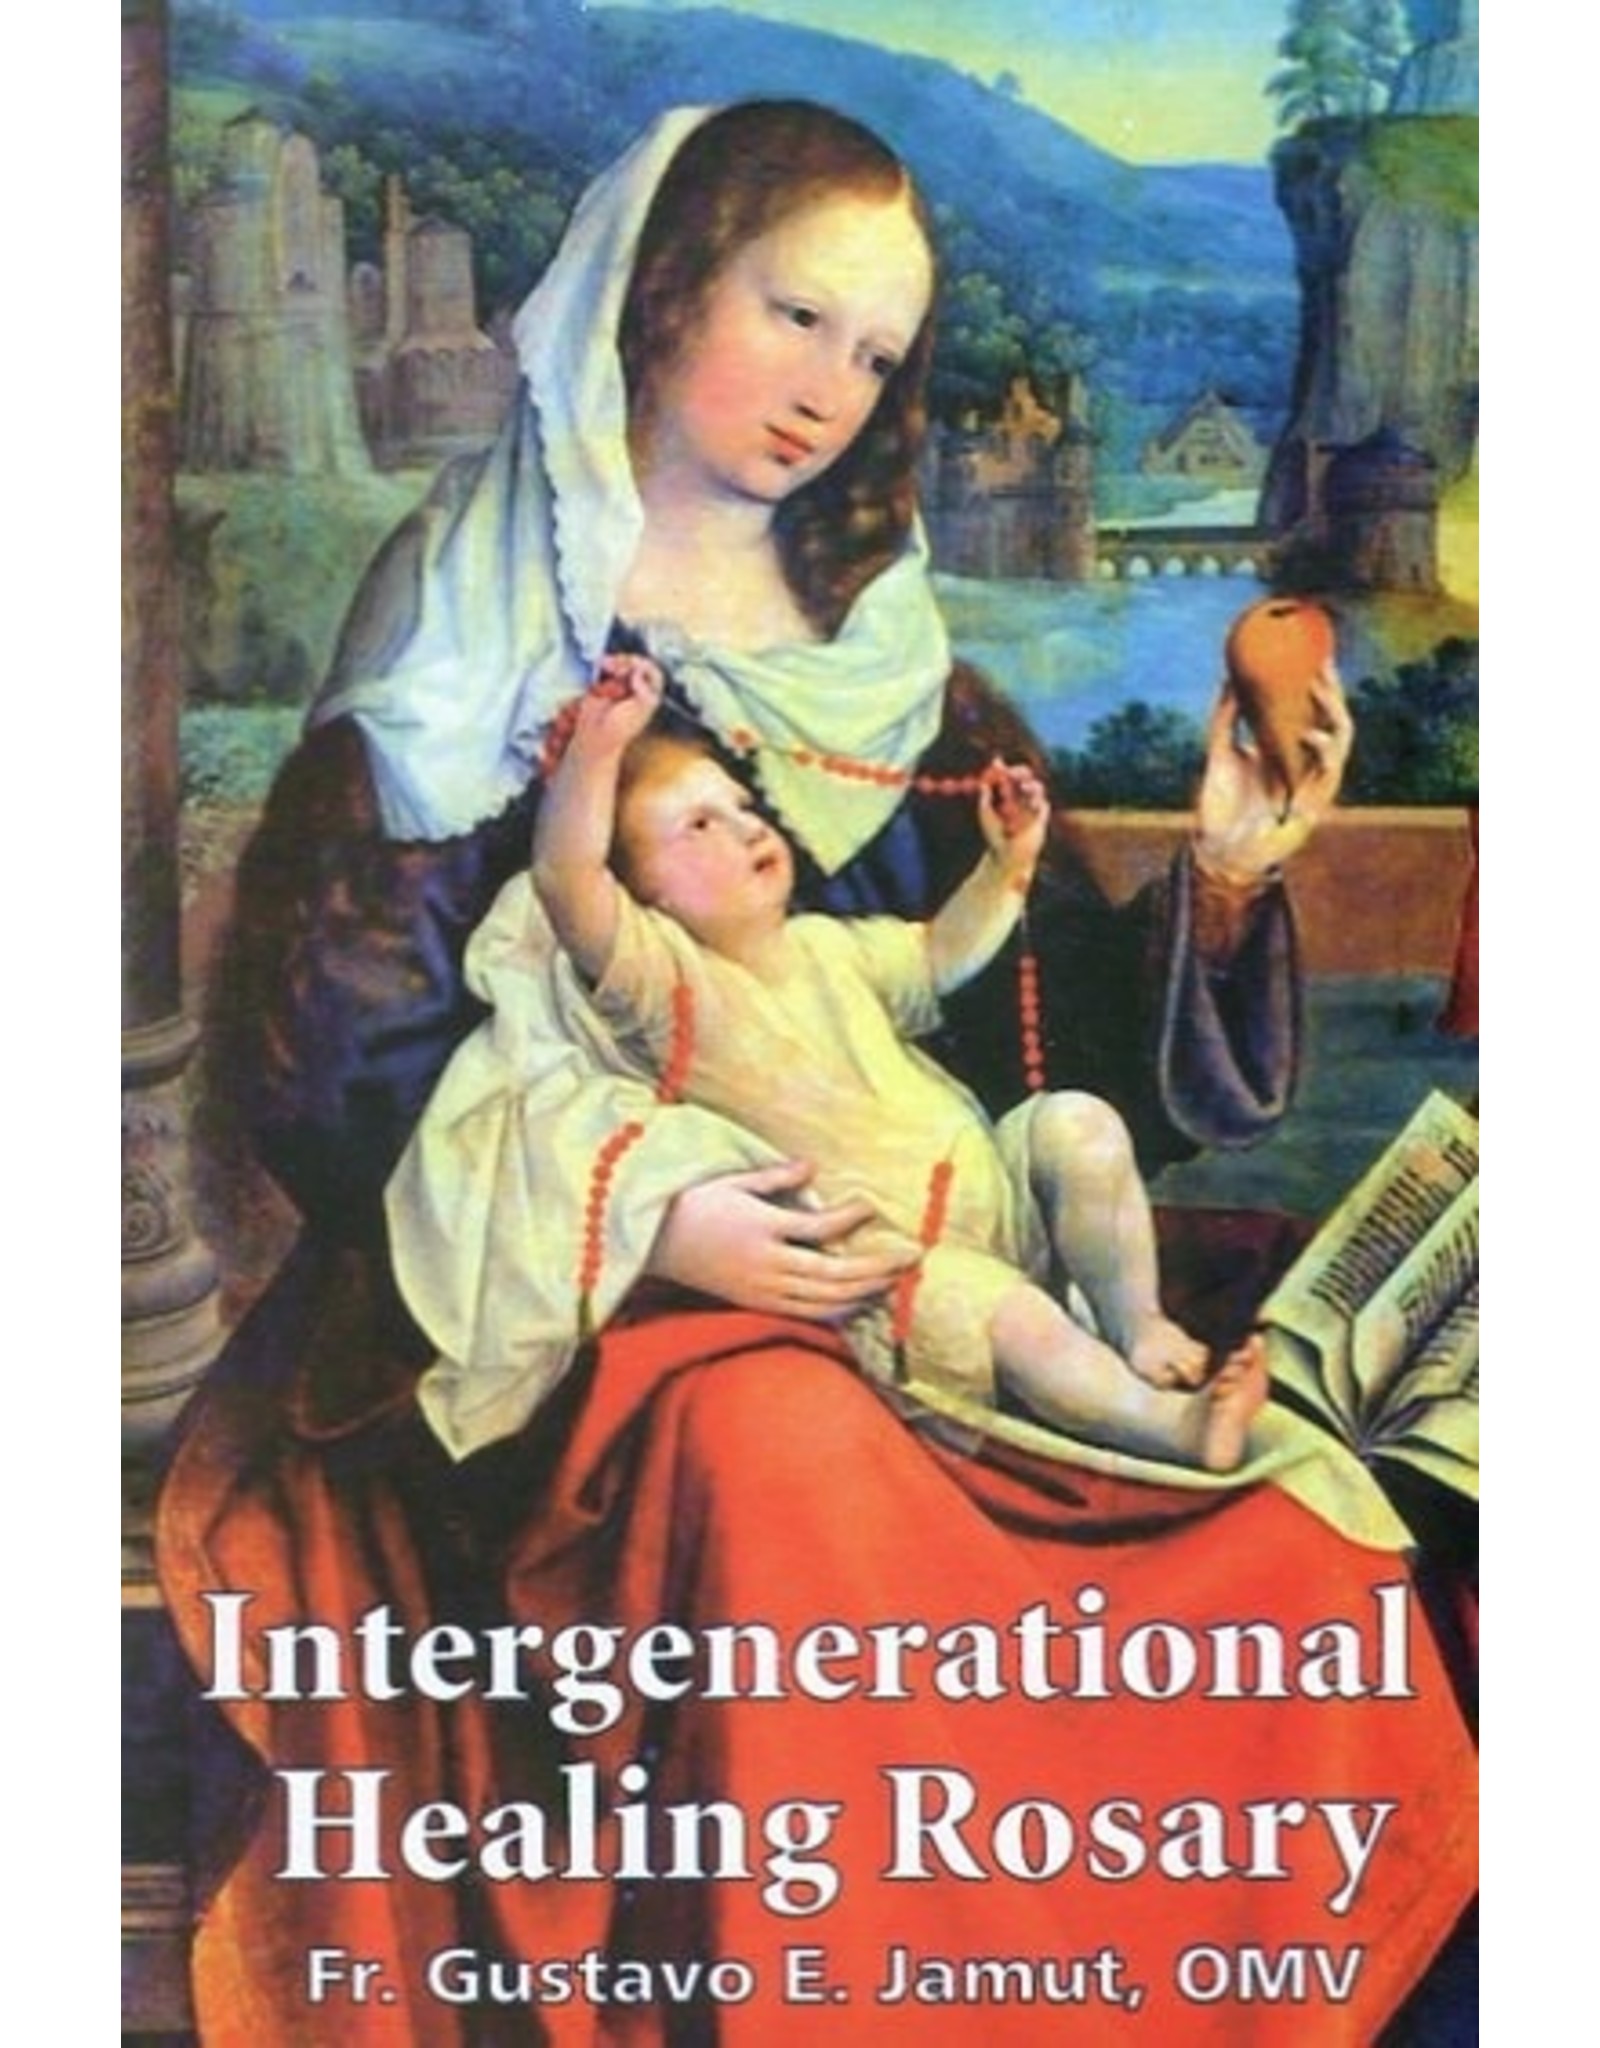 Ave Maria Center of Peace Intergenerational Healing Rosary by Fr. Gustavo E. Jamut, OMV (Booklet)